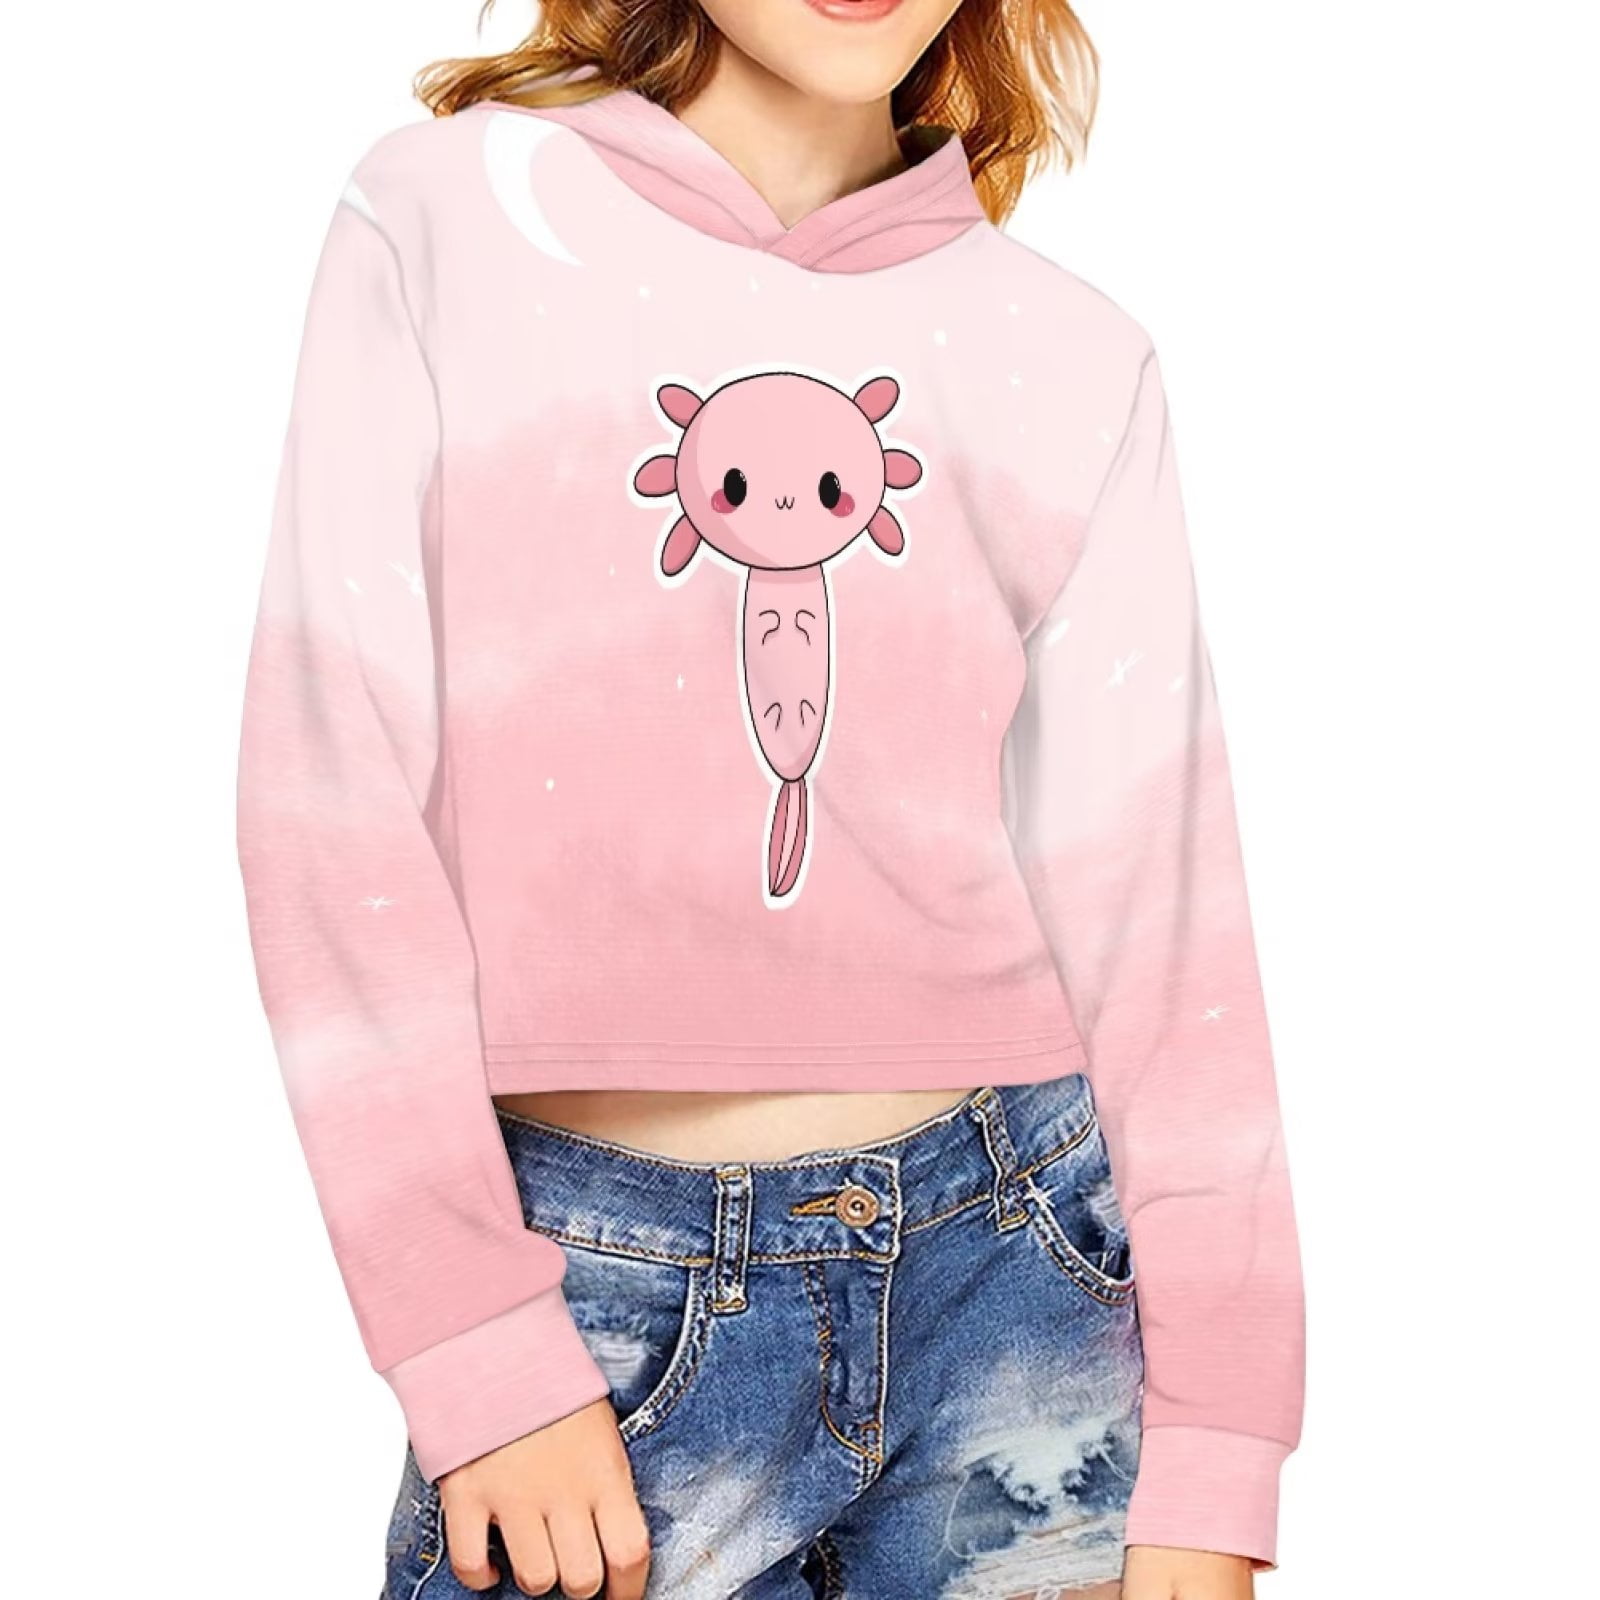  YSTARDREAM Axolotl Hoodie Pink Kids Kawaii Hoodies for Girls  6-7 Long Sleeve Shirts for Teens Cute Clothes Aesthetic Sweatshirts  Crewneck Pullover Tops Fall Outfits Sweater Jumper Yoga Clothing: Clothing,  Shoes 